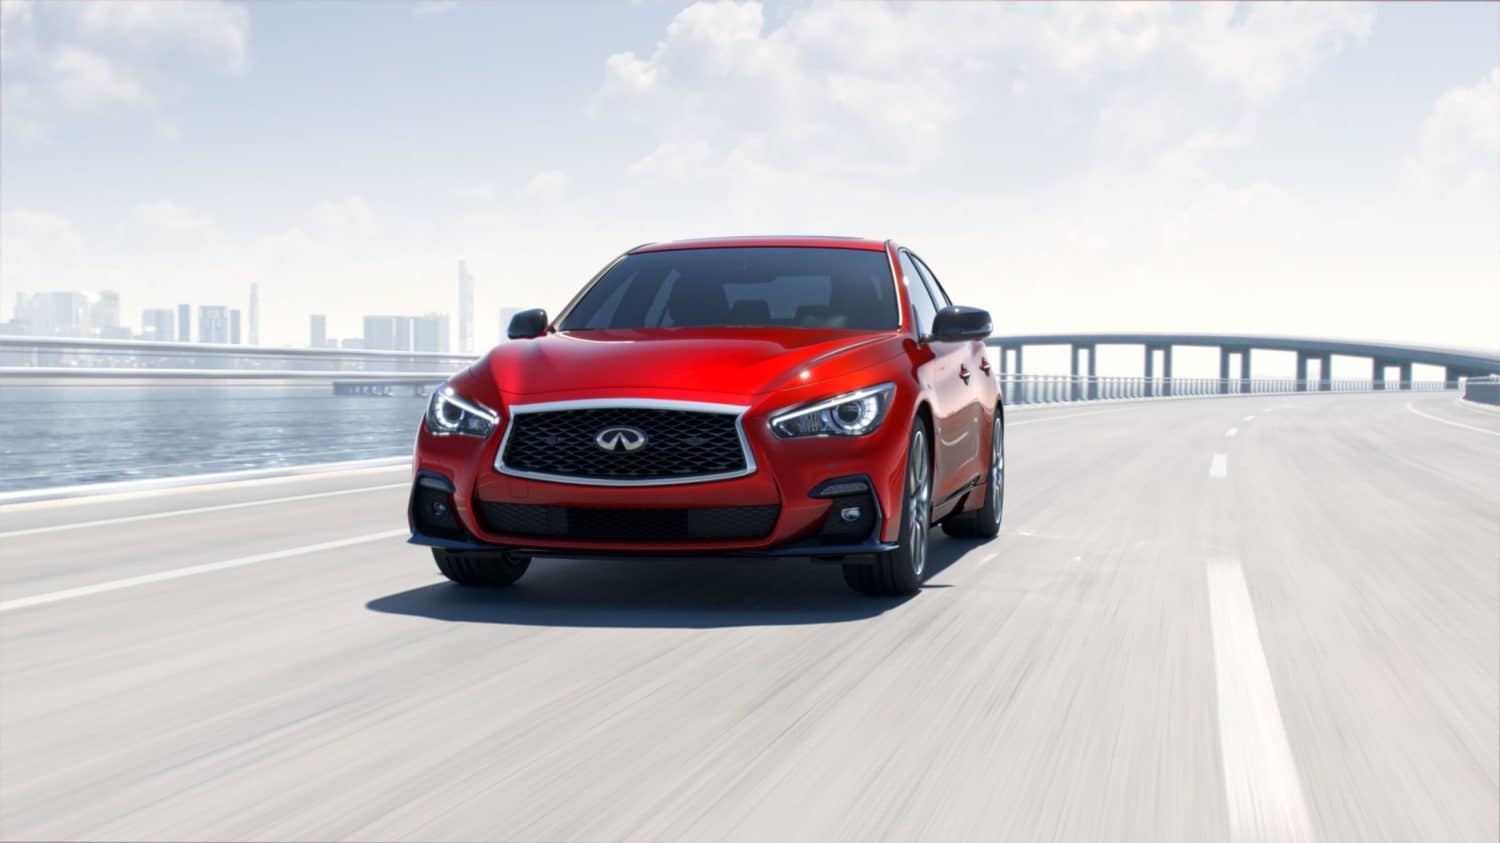 2018 INFINITI Q50 Driving on the Highway Alongside Water